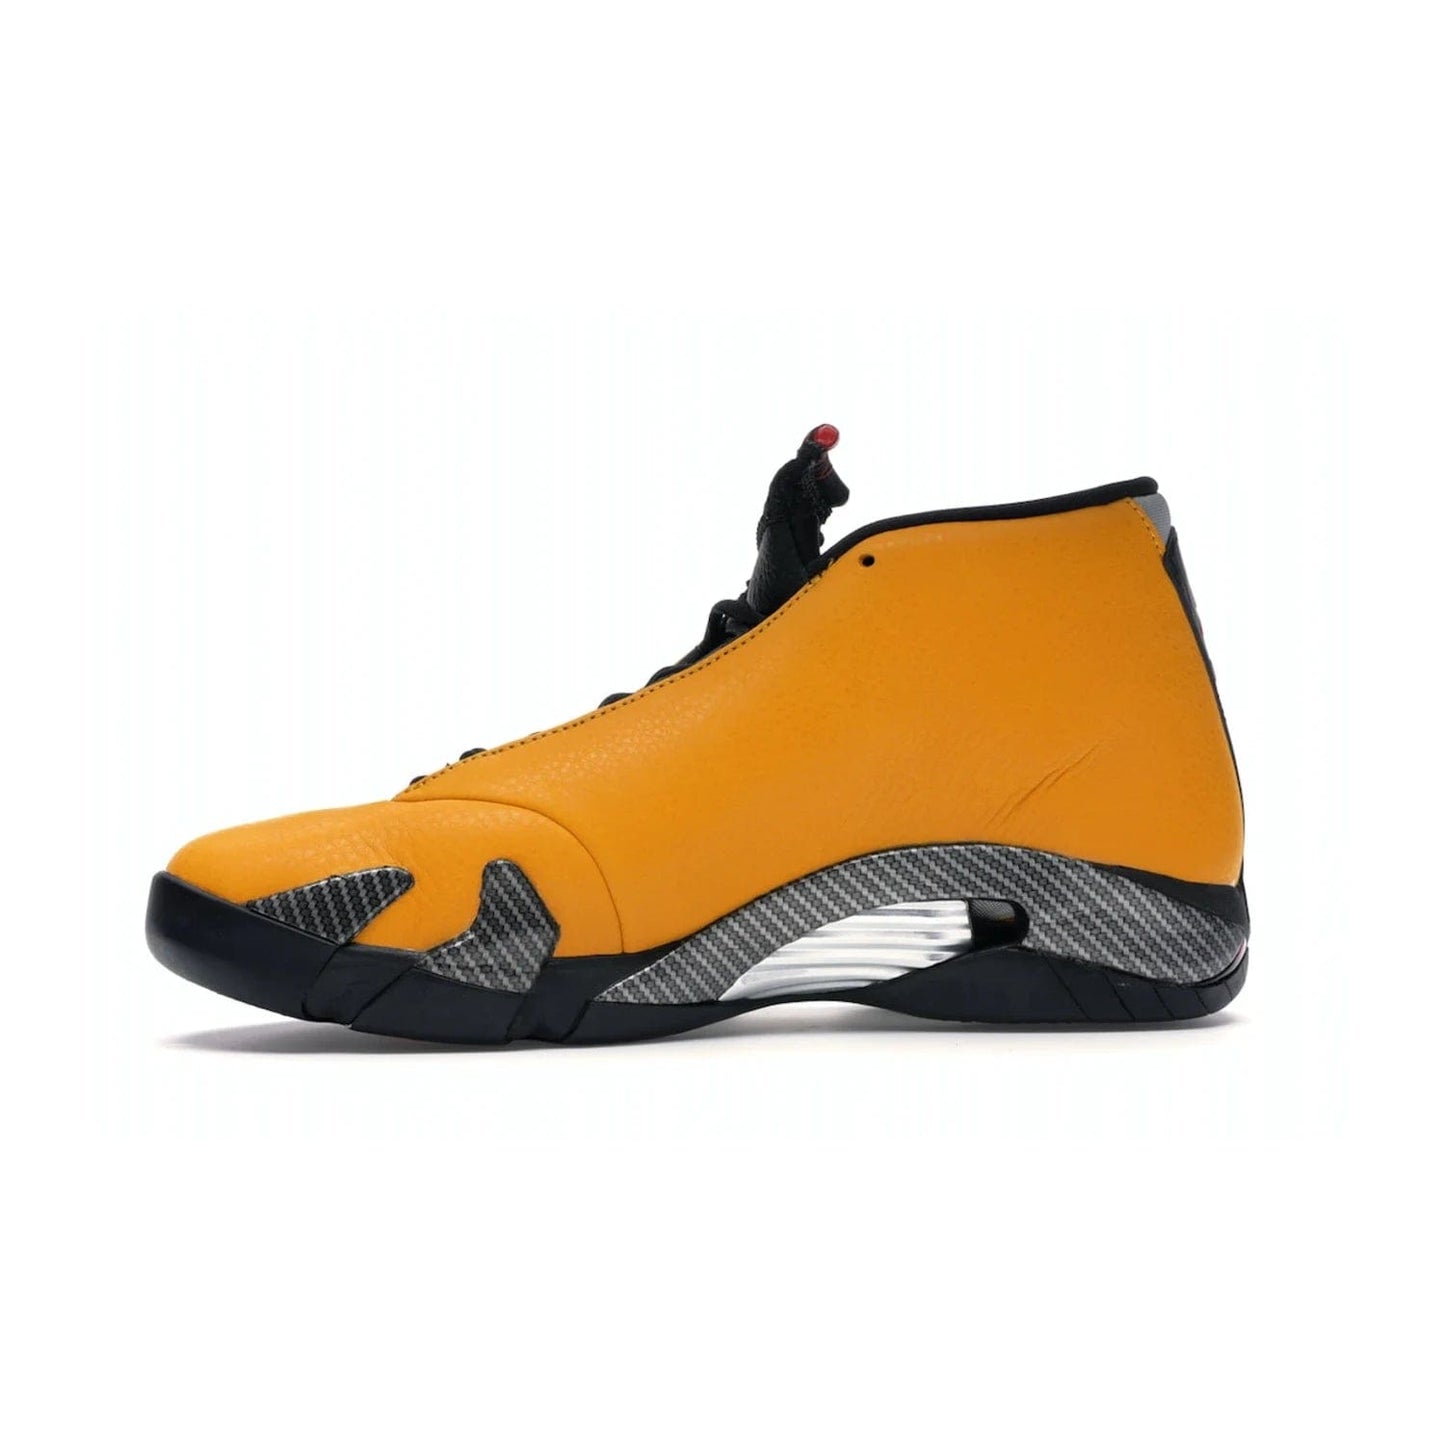 Jordan 14 Retro University Gold - Image 18 - Only at www.BallersClubKickz.com - Air Jordan 14 Retro University Gold: High-quality leather sneaker with Jumpman, tongue & heel logos. Zoom Air units & herringbone traction for superior comfort. University Gold outsole for stylish streetwear.